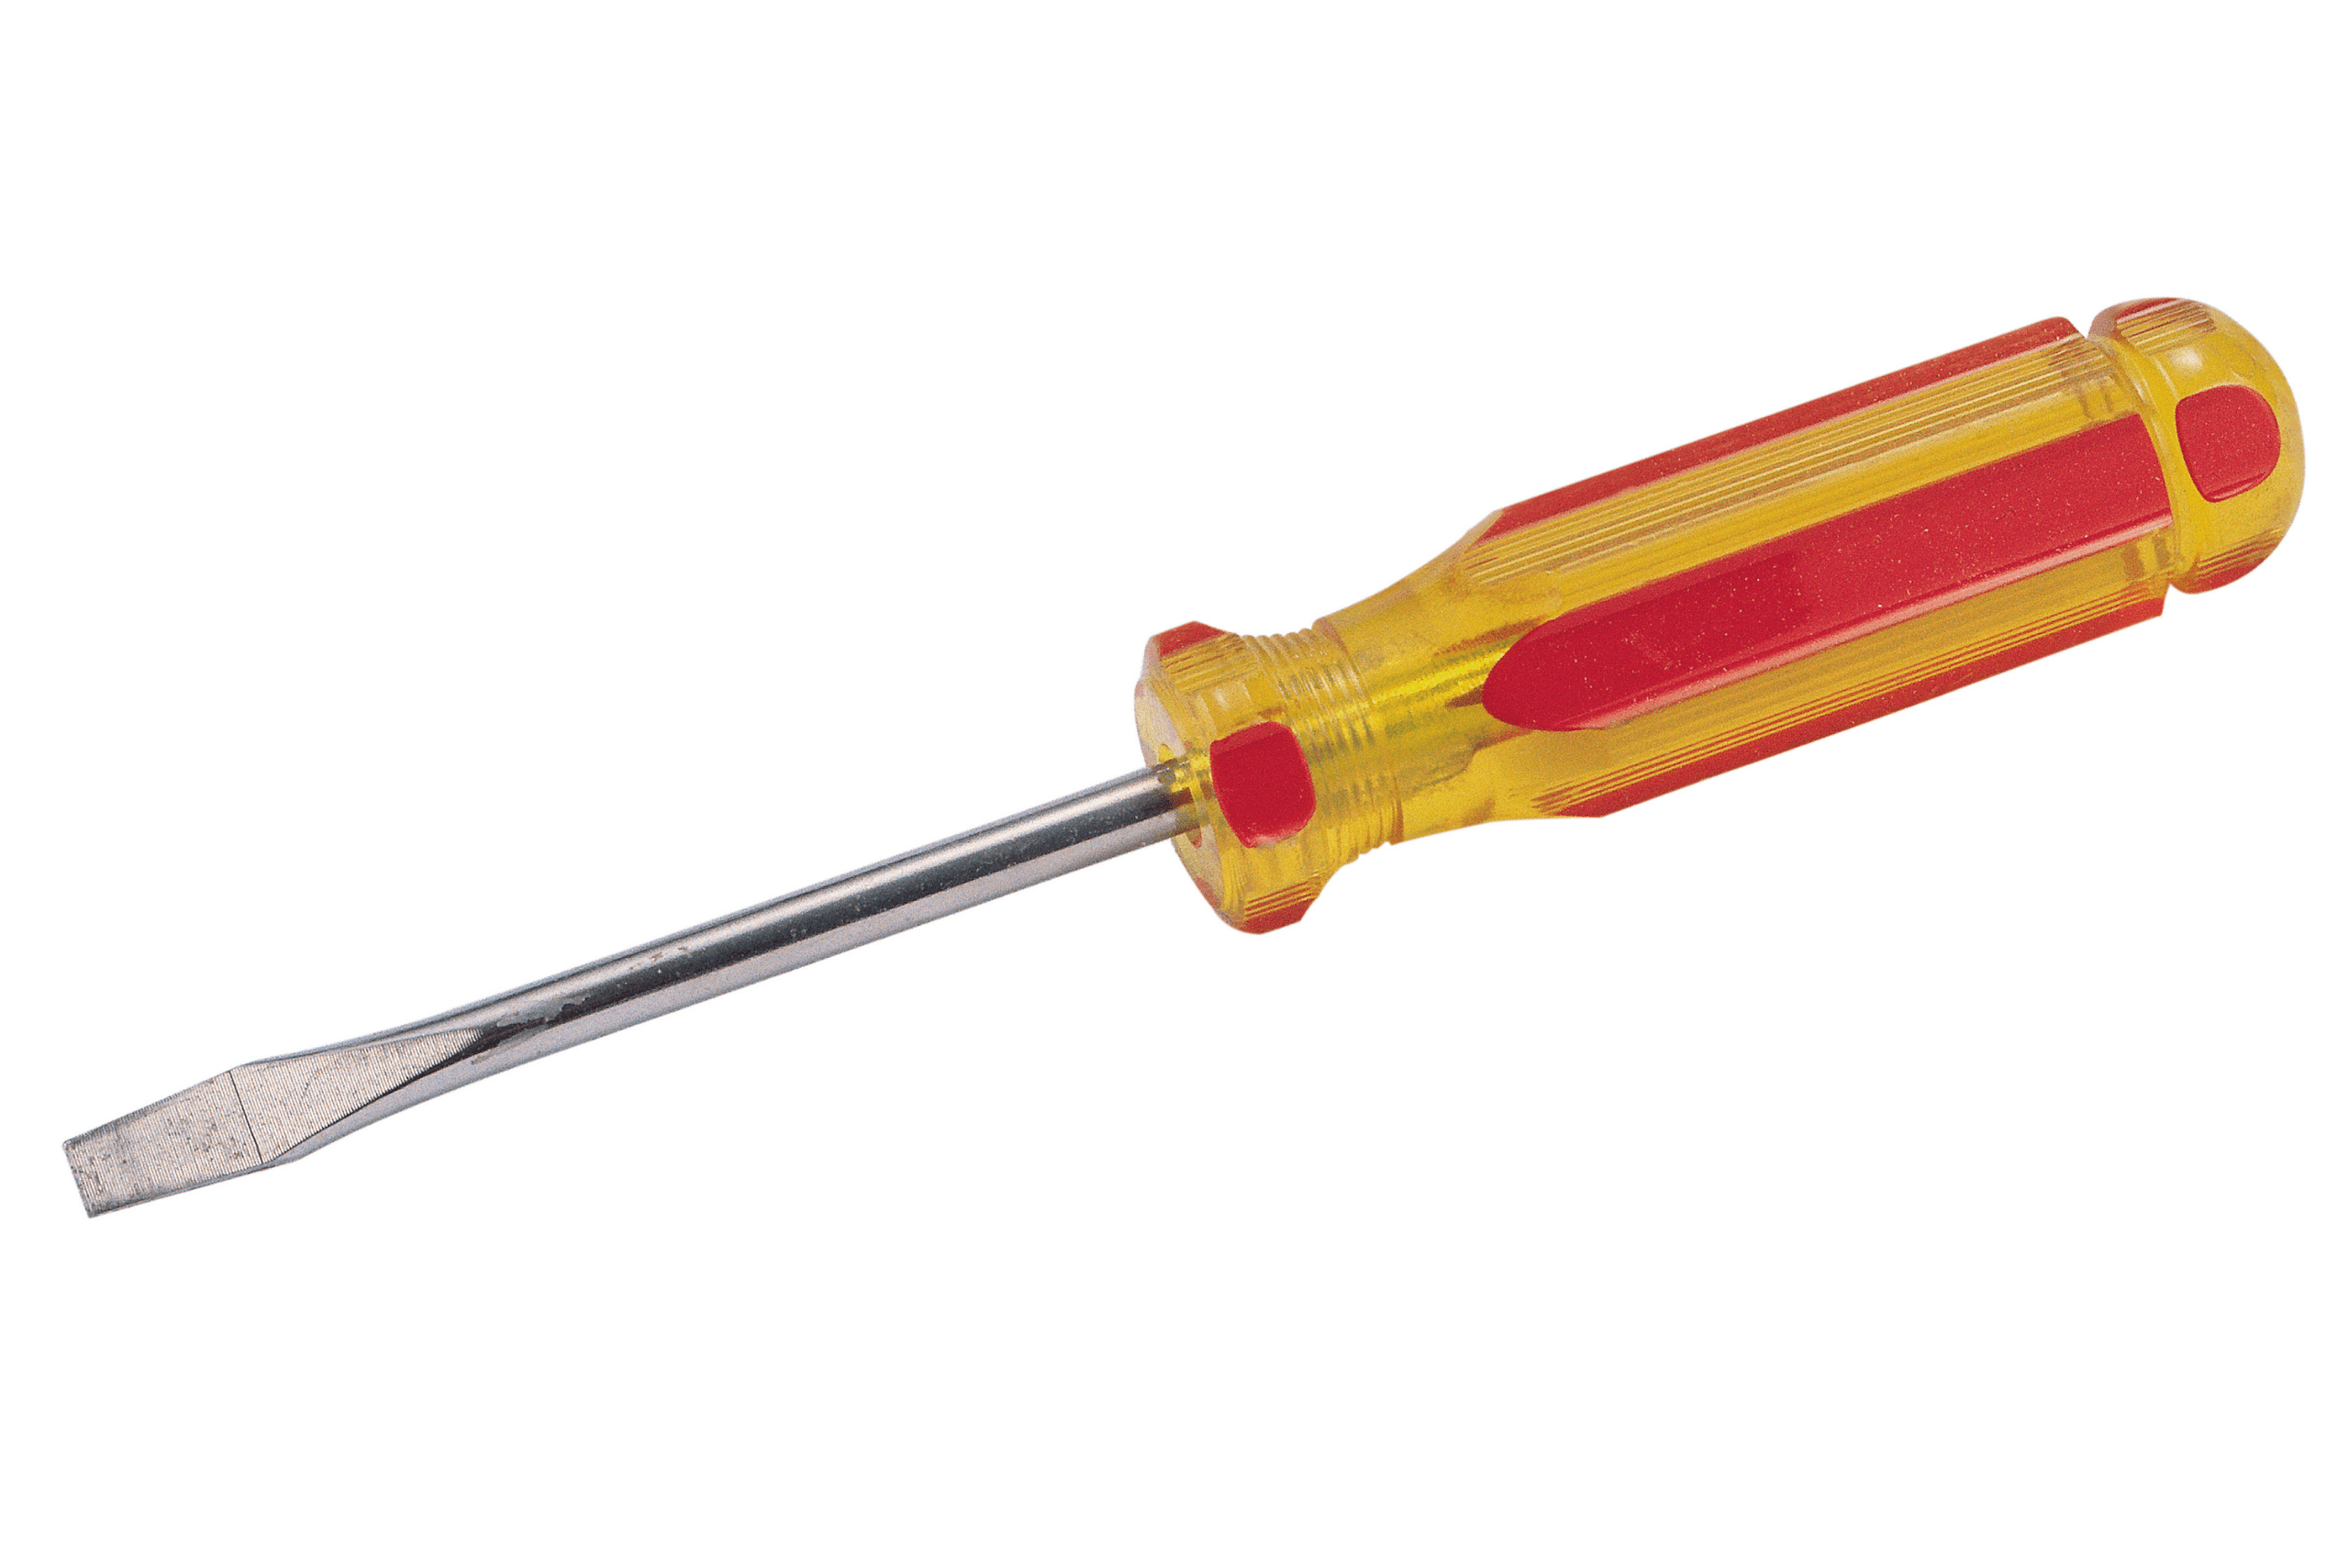 Yellow and red flathead screwdriver.